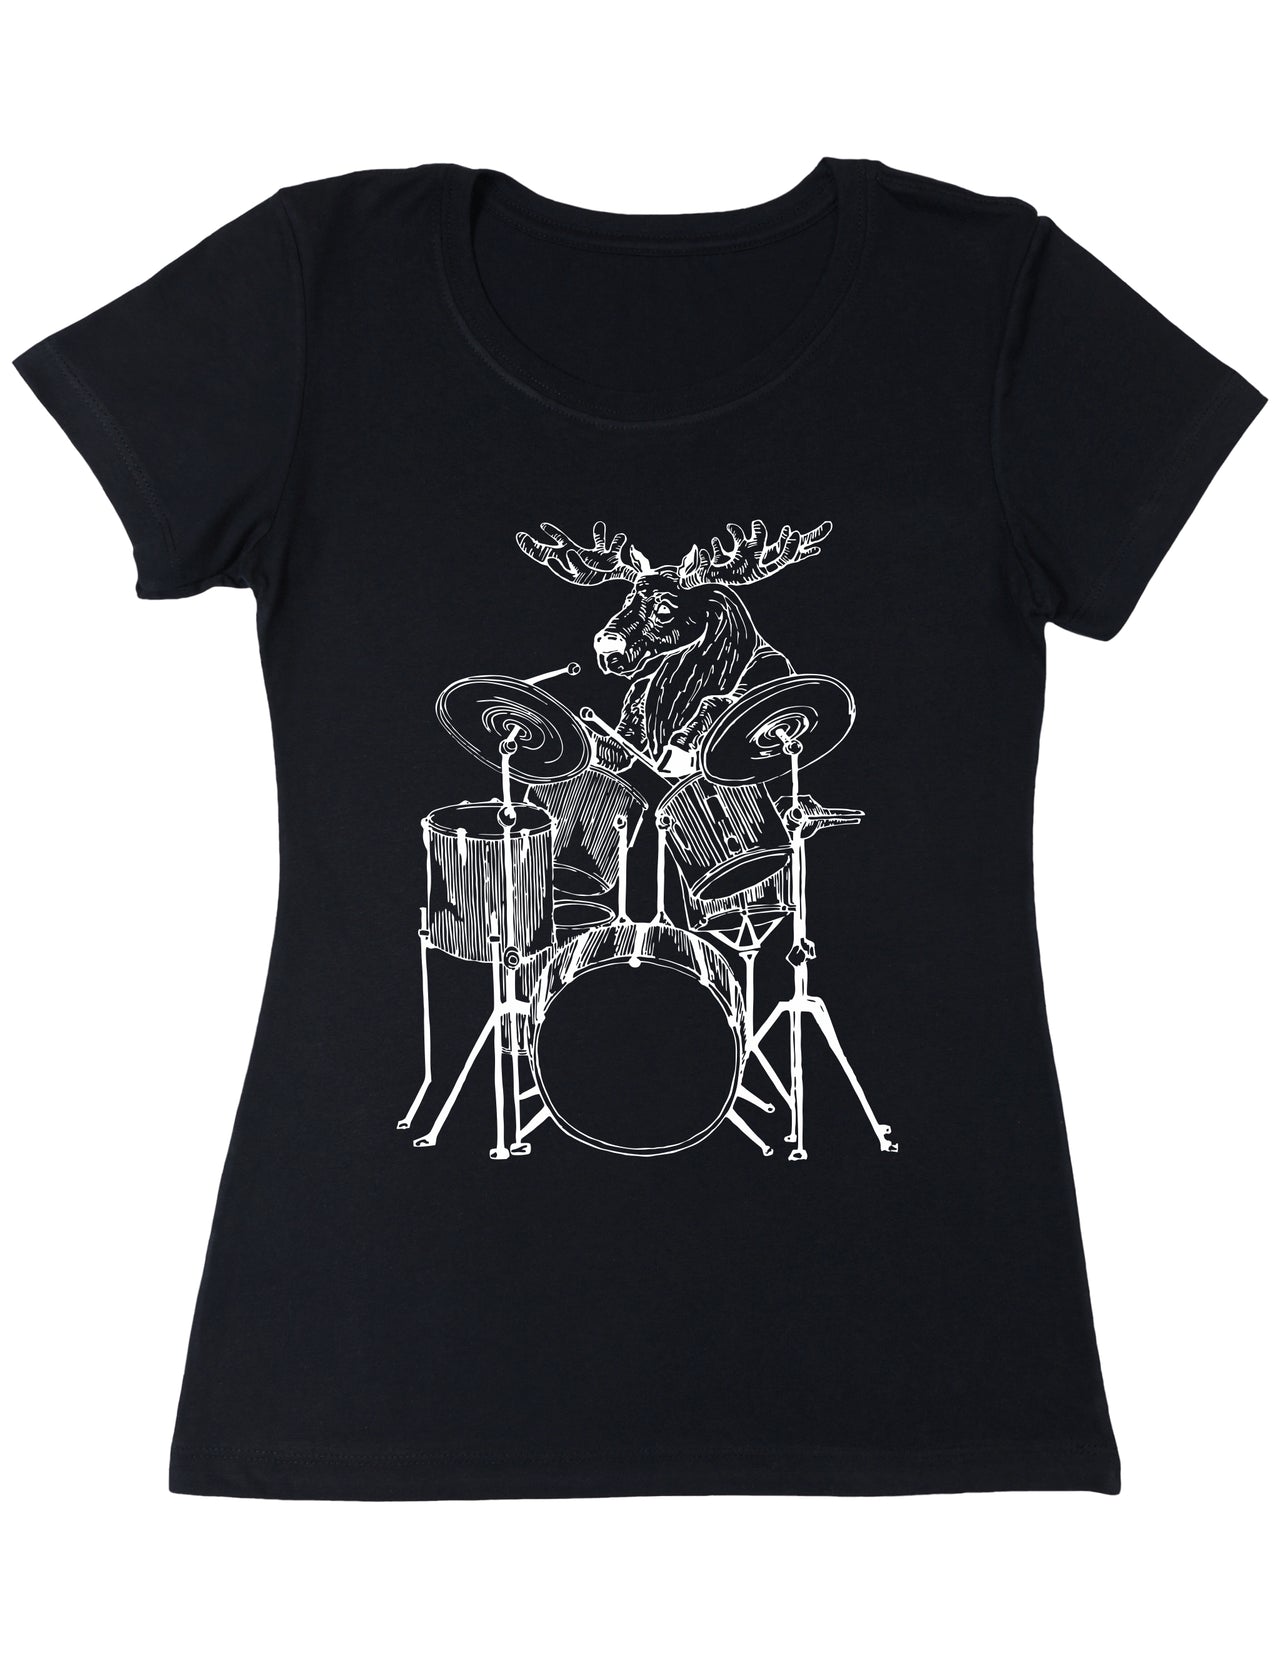 SEEMBO Moose Playing Drums Funny Drummer Musician Band Women Poly-Cotton T-Shirt